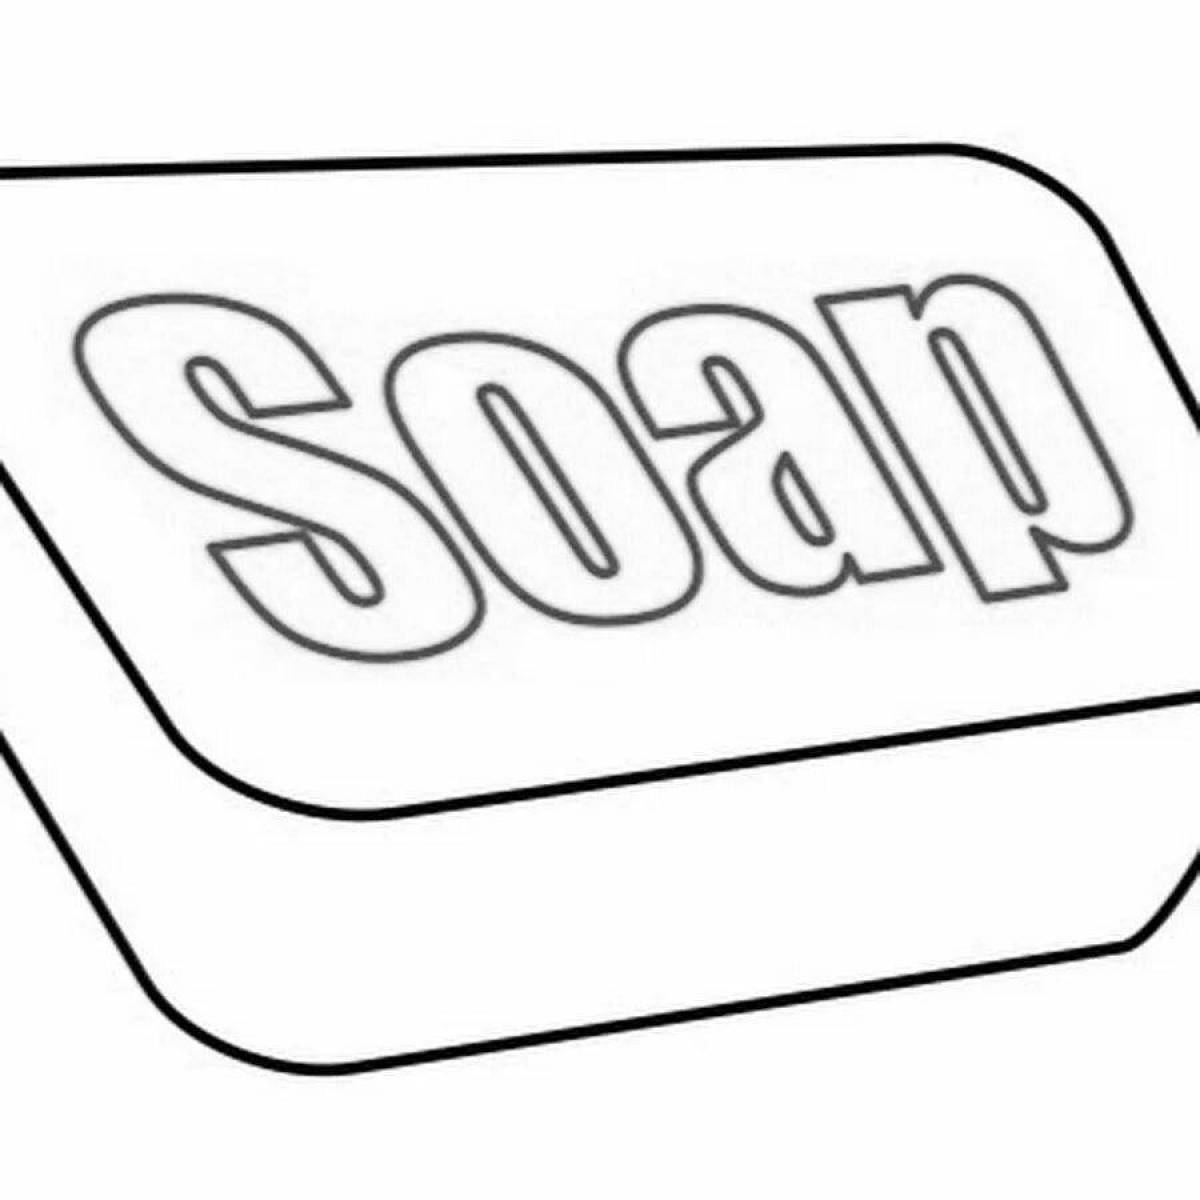 Animated soap coloring page